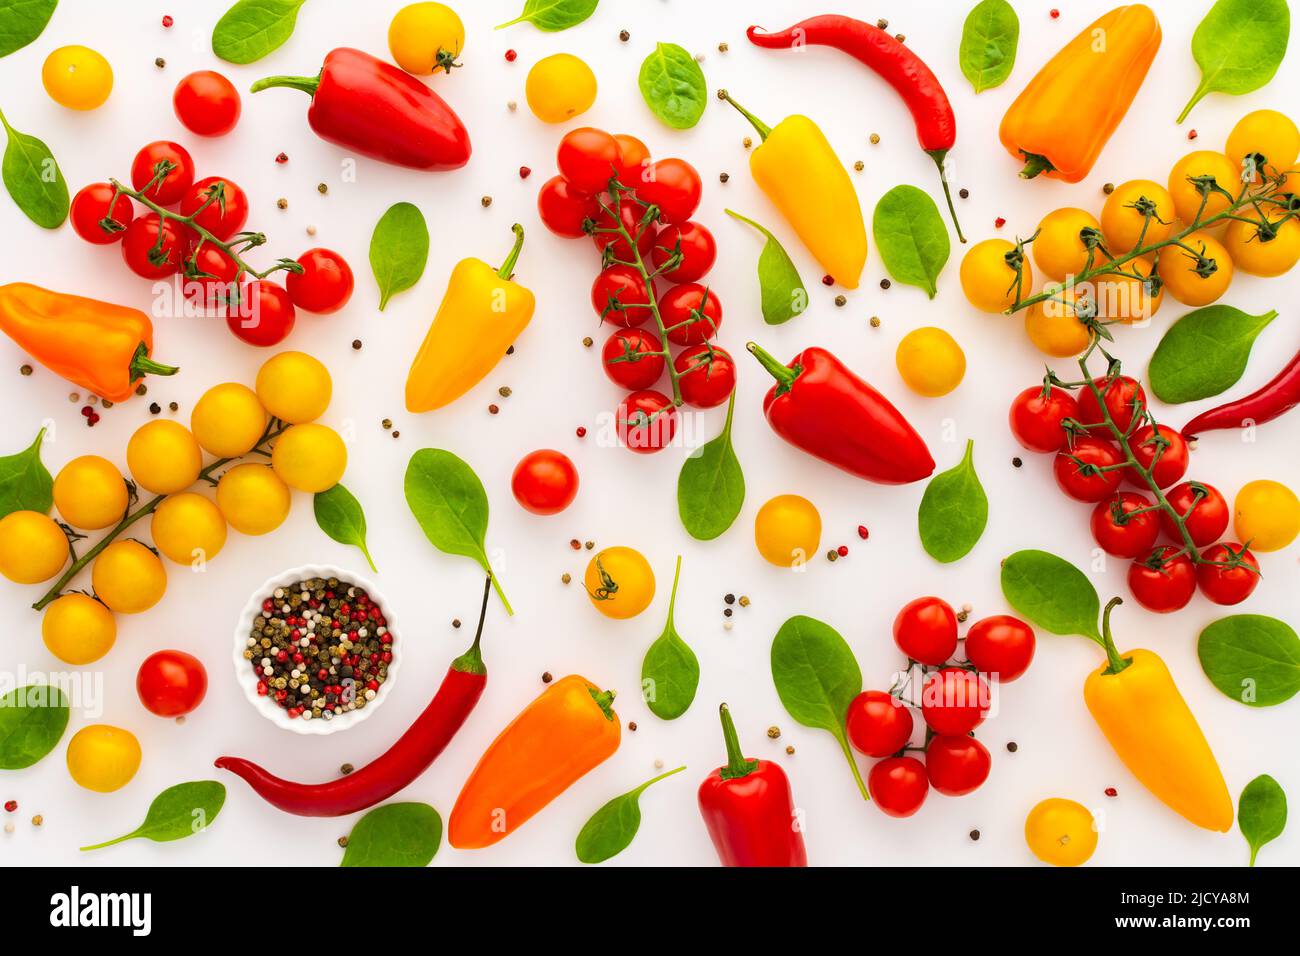 Yellow and red tomatoes, hot peppers, spinach and spices on a white background, food background, top view Stock Photo